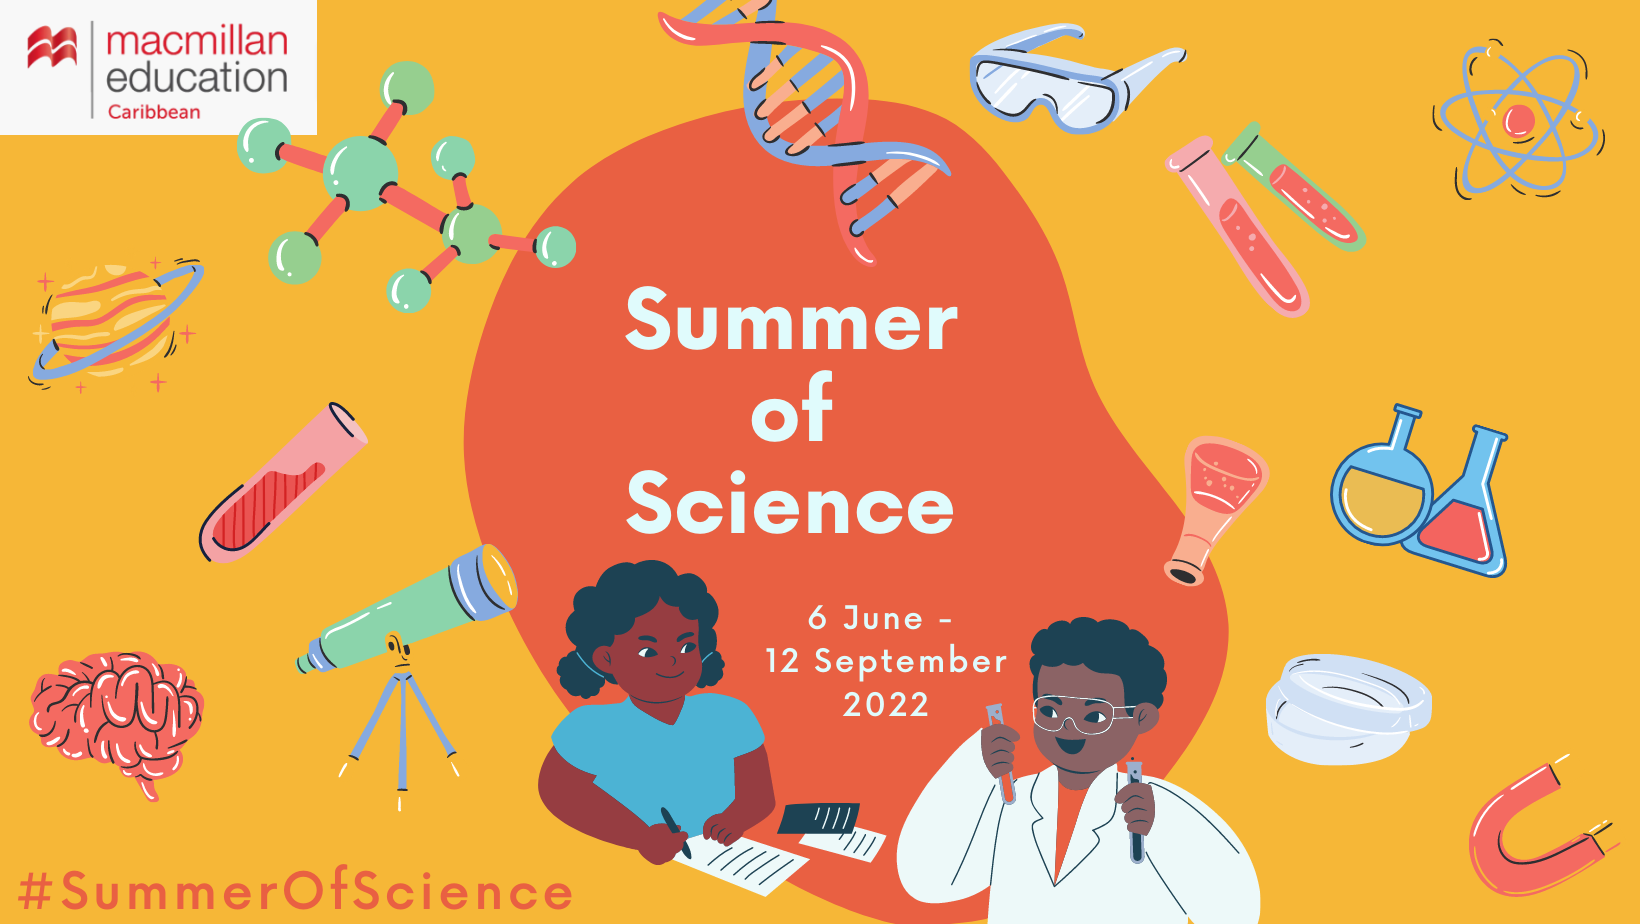 The Summer of Science is here!